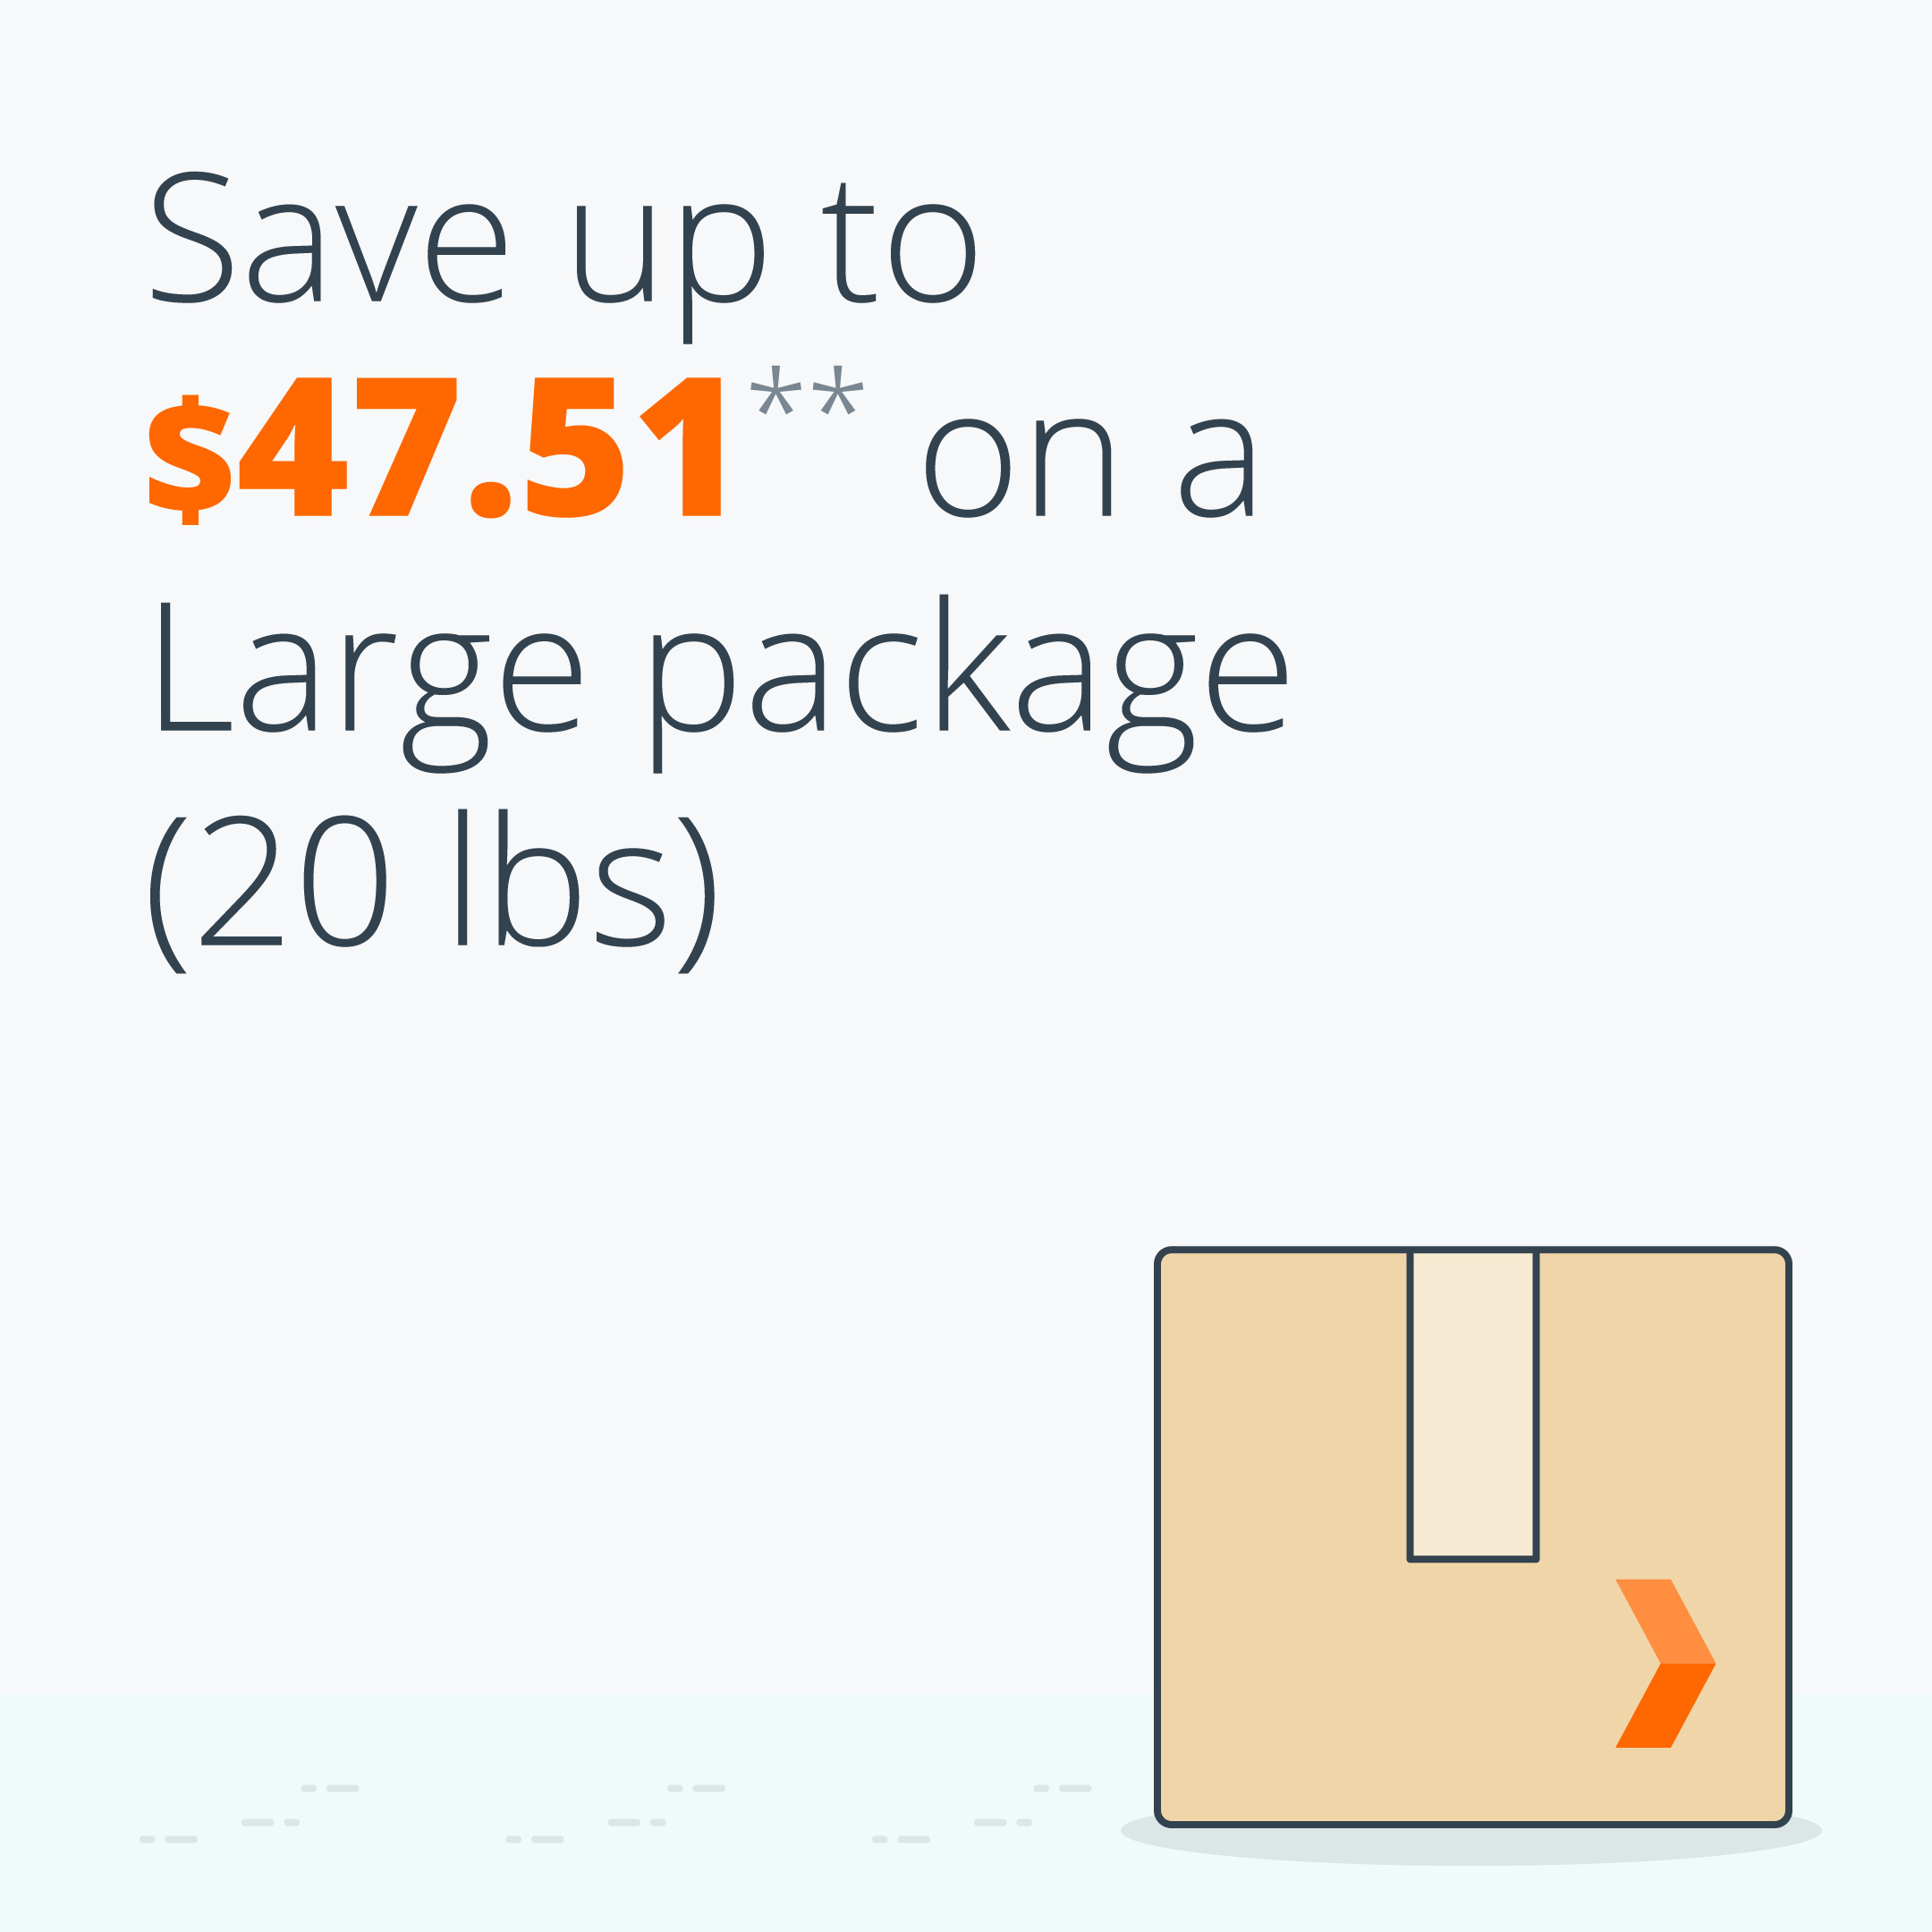 Save up to $47.51 on a Large package (20 lbs) | US New Pricing 2021